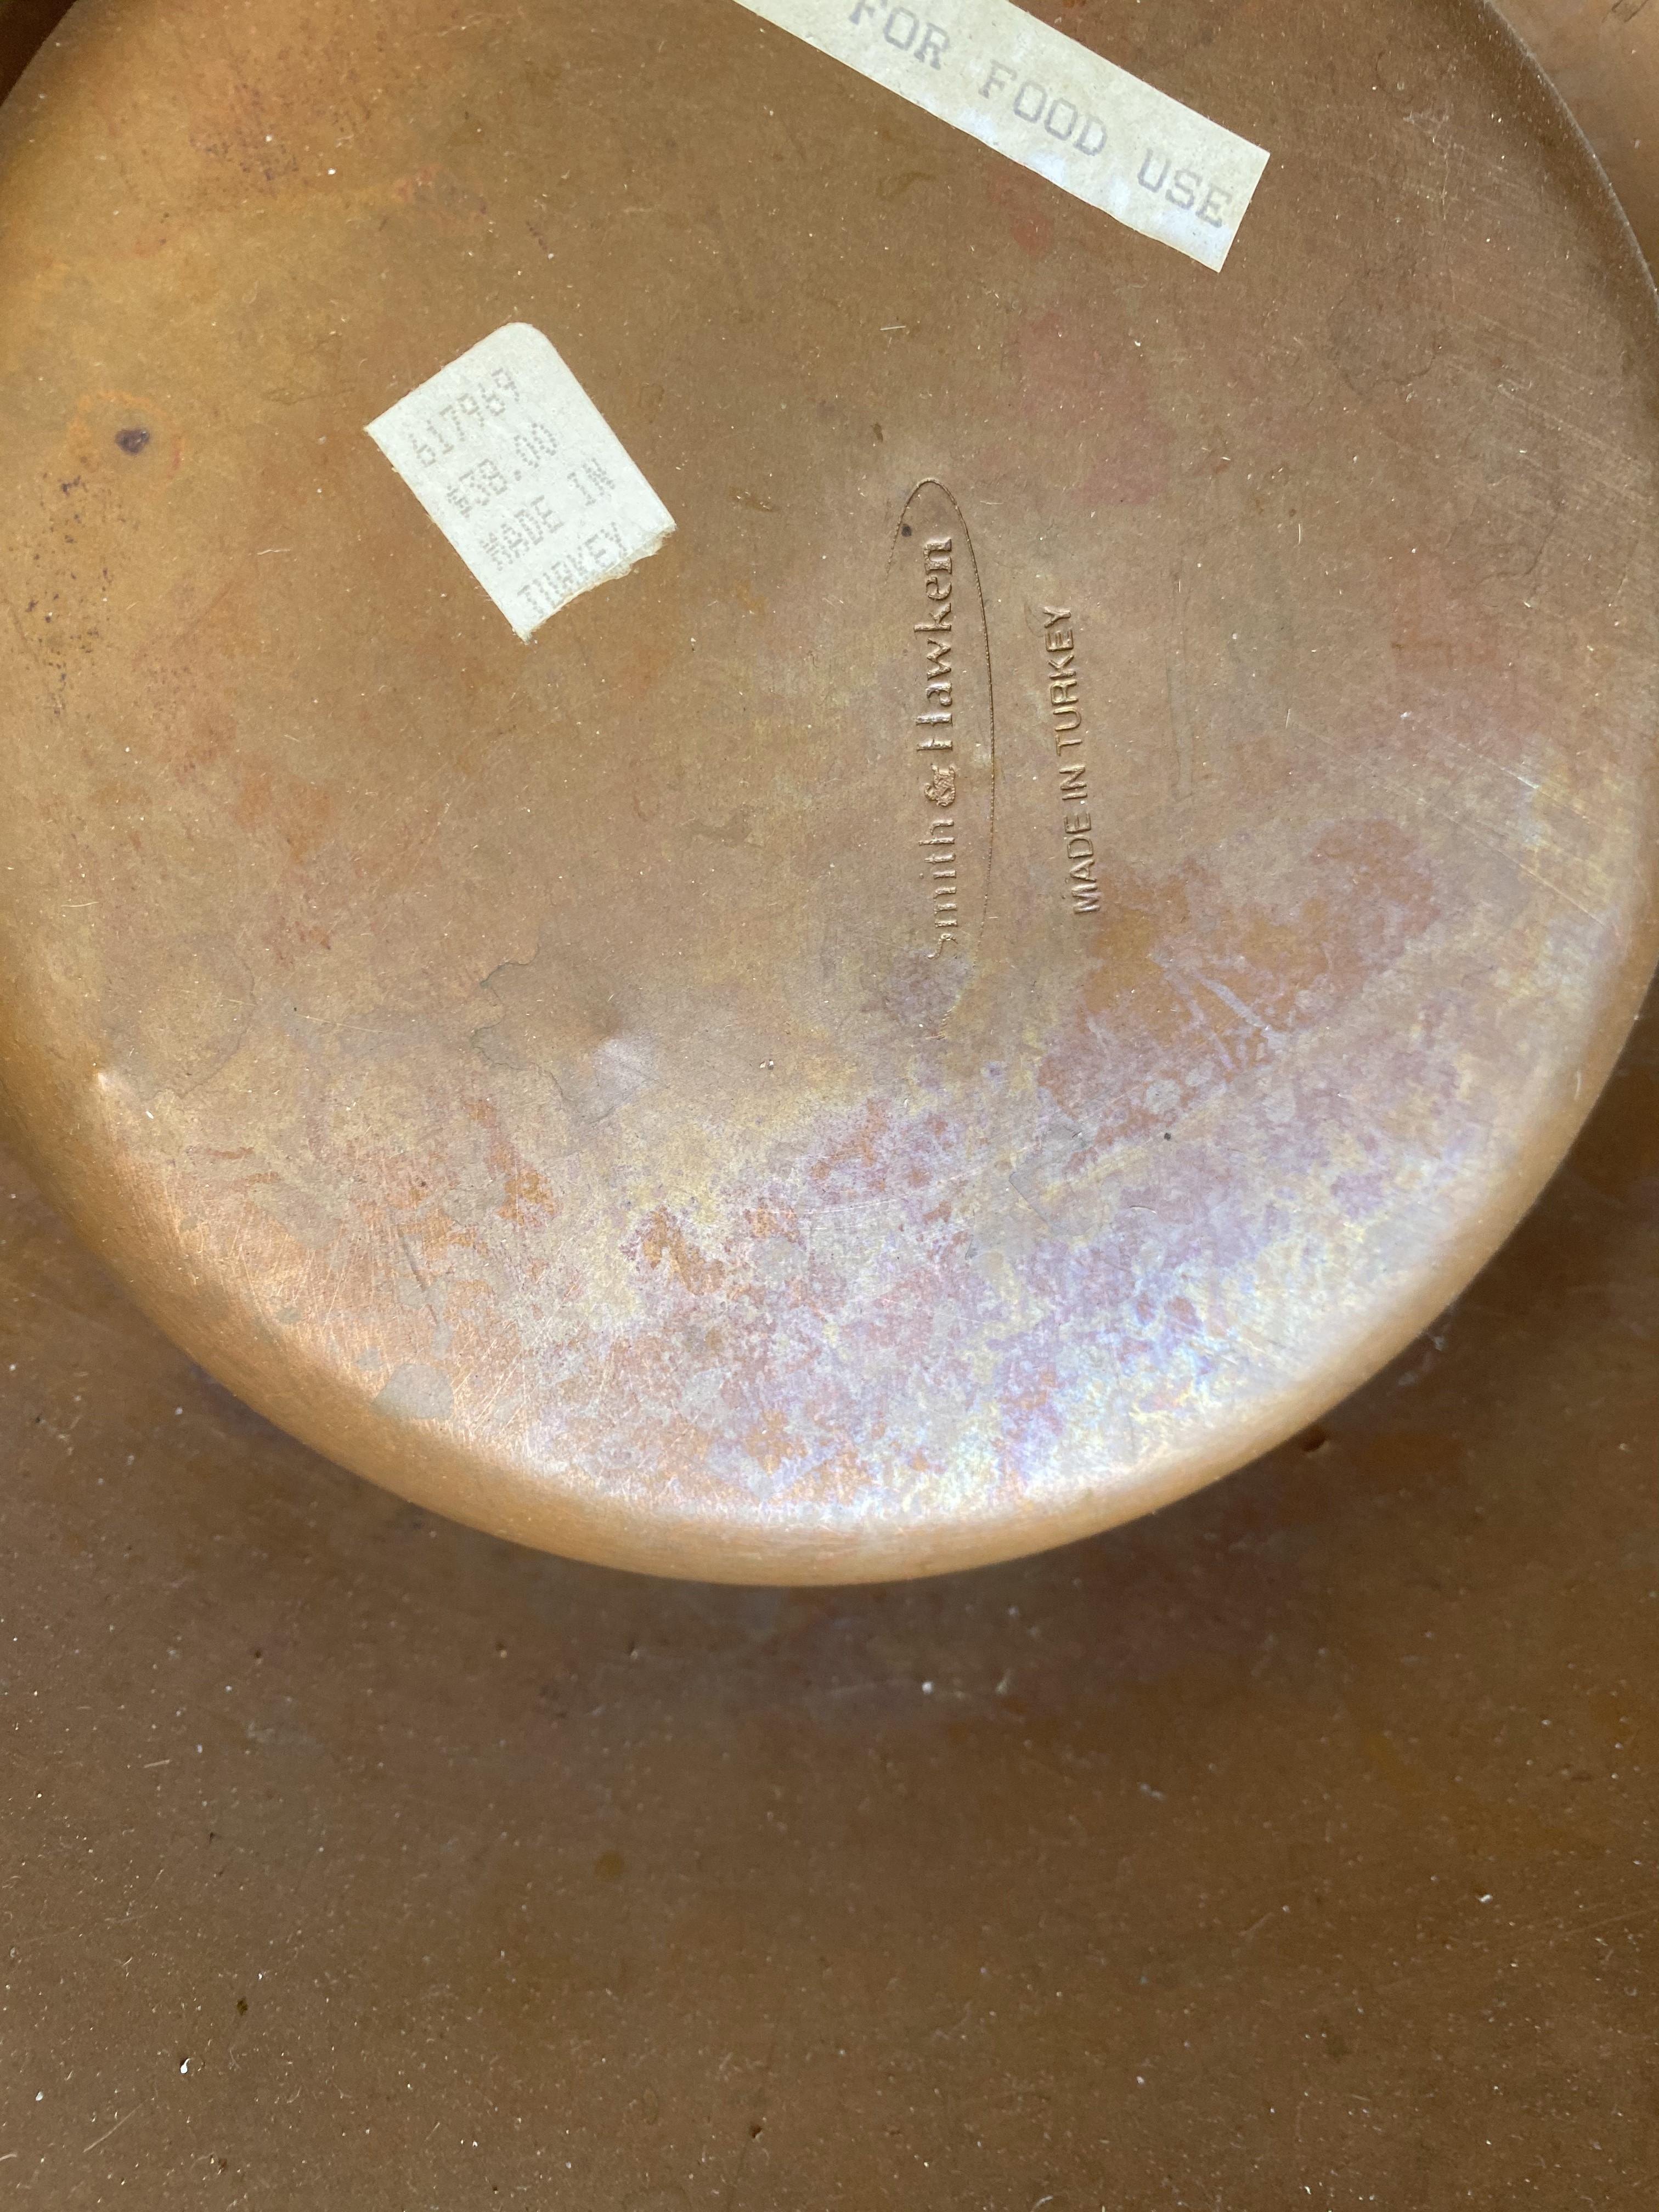 Large copper basin with lid PLUS